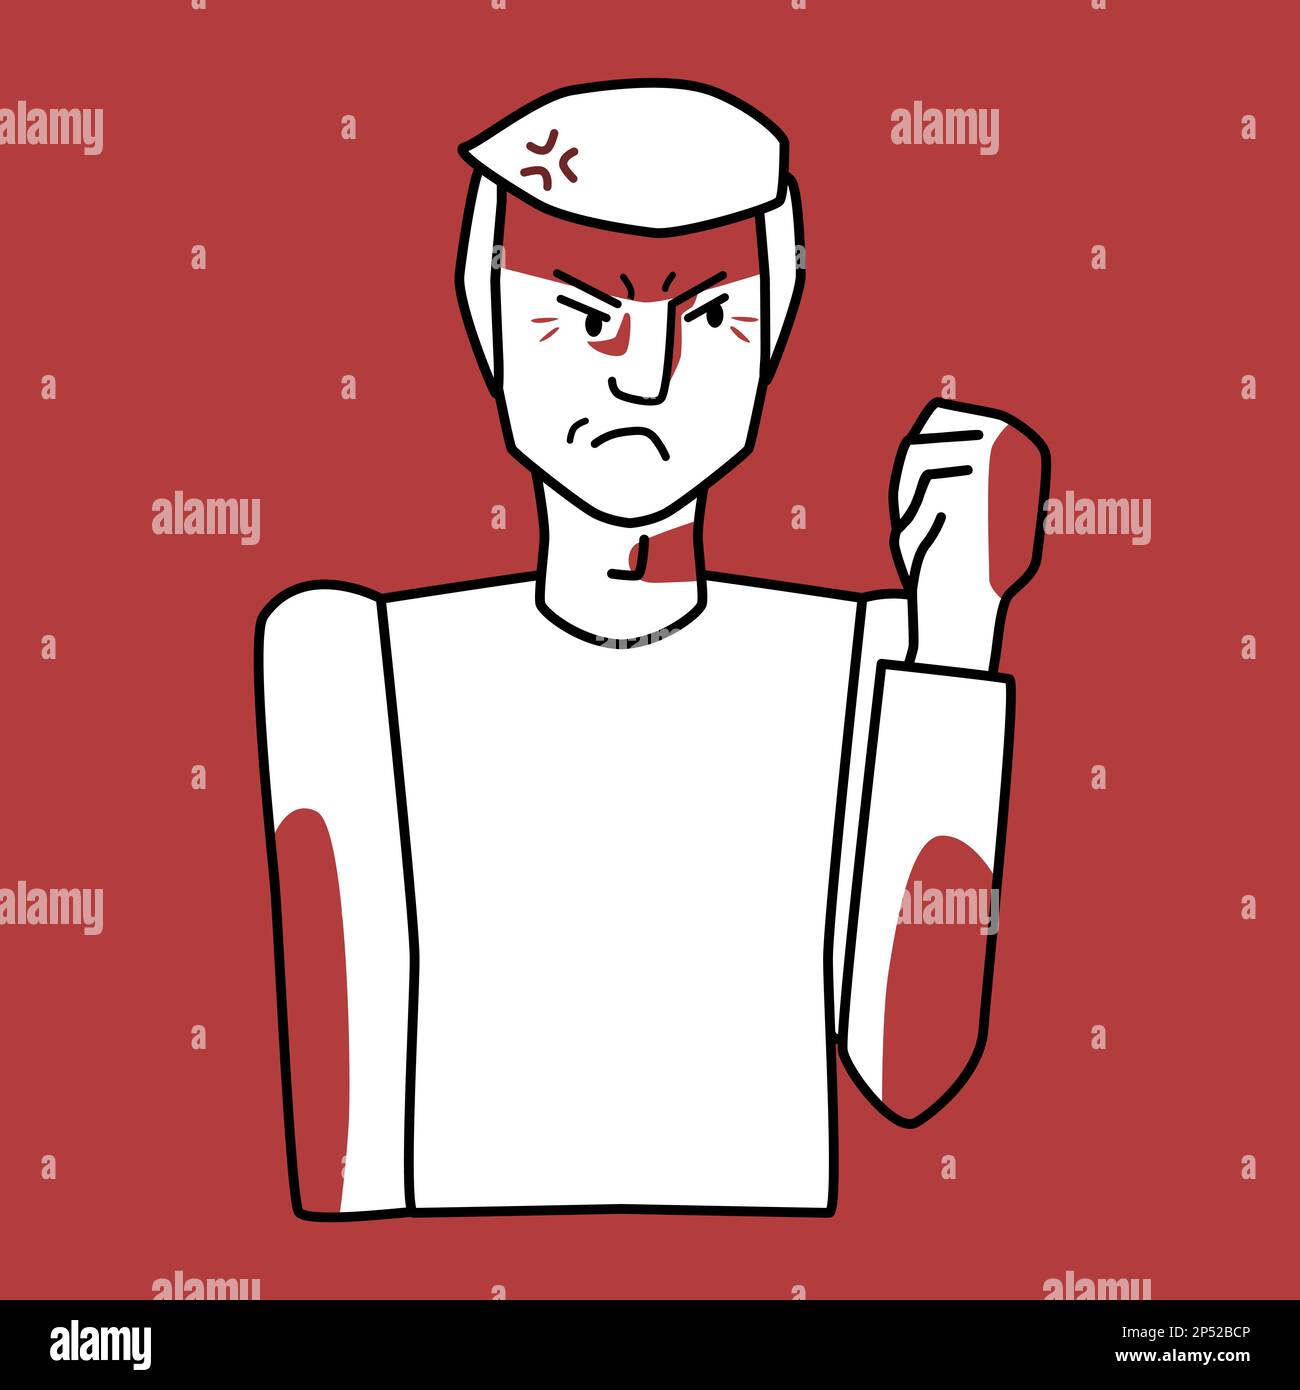 Angry white man with blond hair threatens with a fist, red and white. Line art hand drawn sketch style design, half body vector illustration. Stock Vector